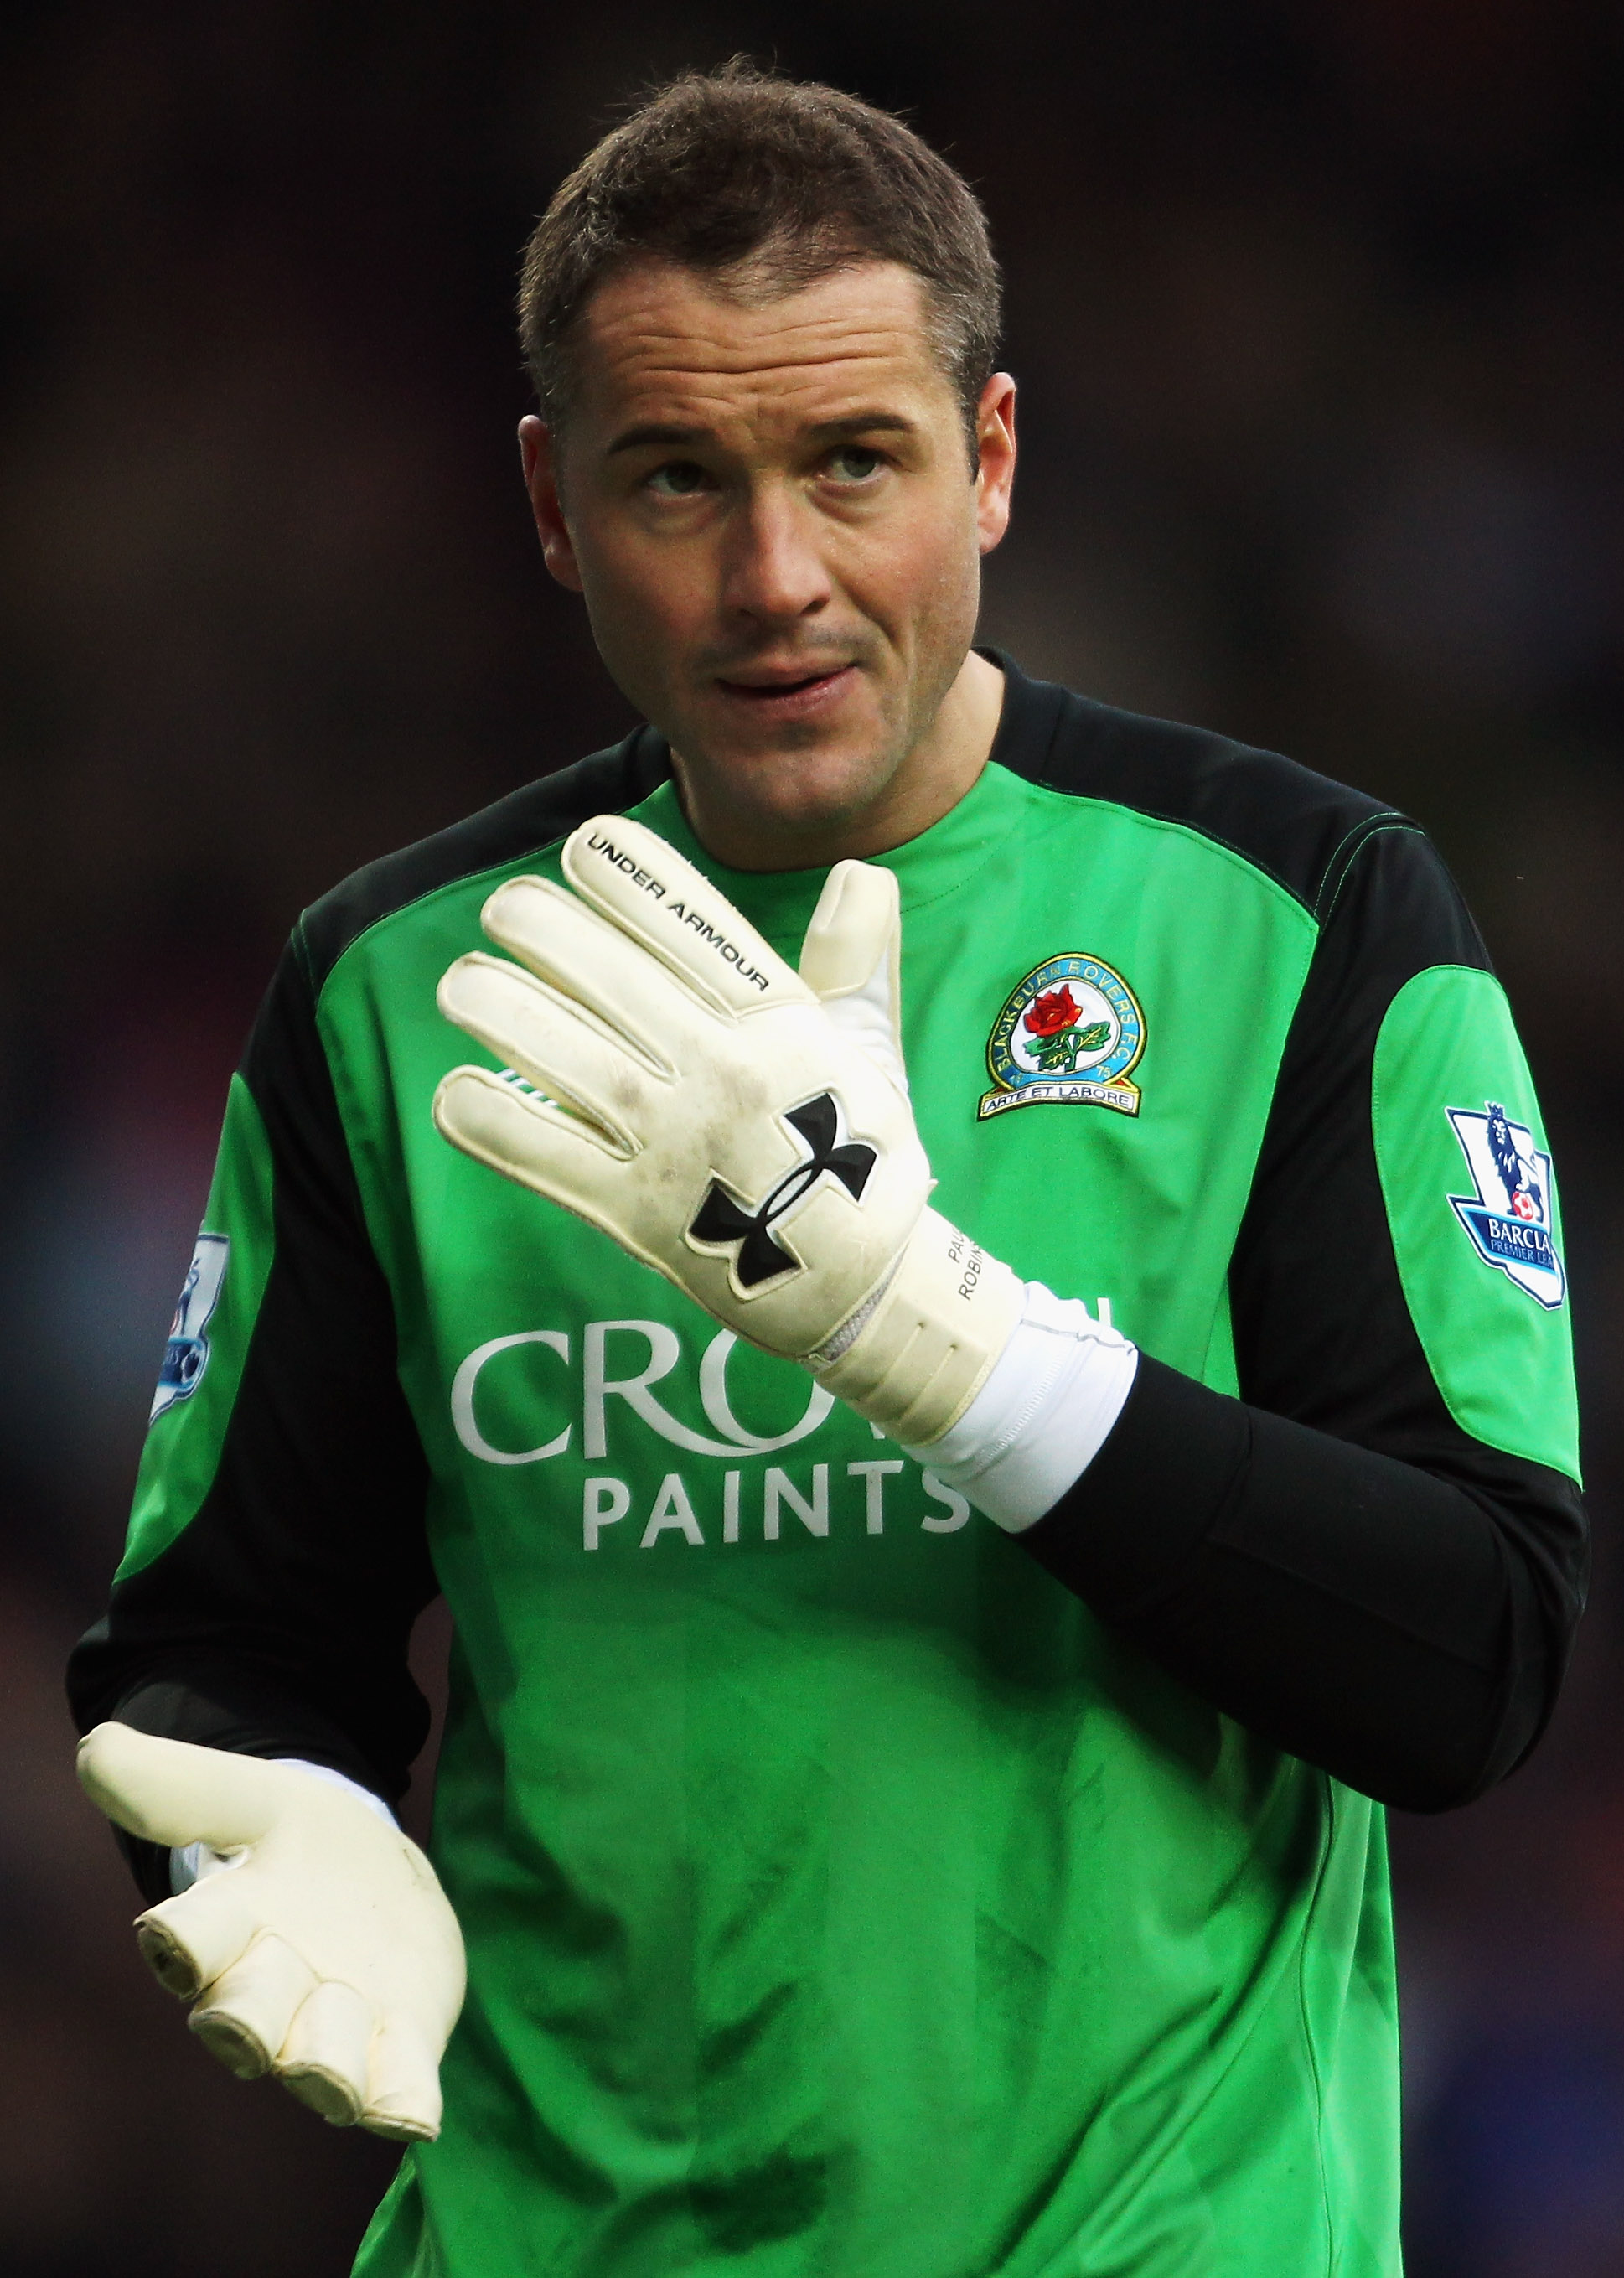 BLACKBURN, ENGLAND - DECEMBER 26:  Blackburn Rovers goalkeeper Paul Robinson looks on during the Barclays Premier League match between Blackburn and Stoke City at Ewood Park on December 26, 2010 in Blackburn, England.  (Photo by Bryn Lennon/Getty Images)